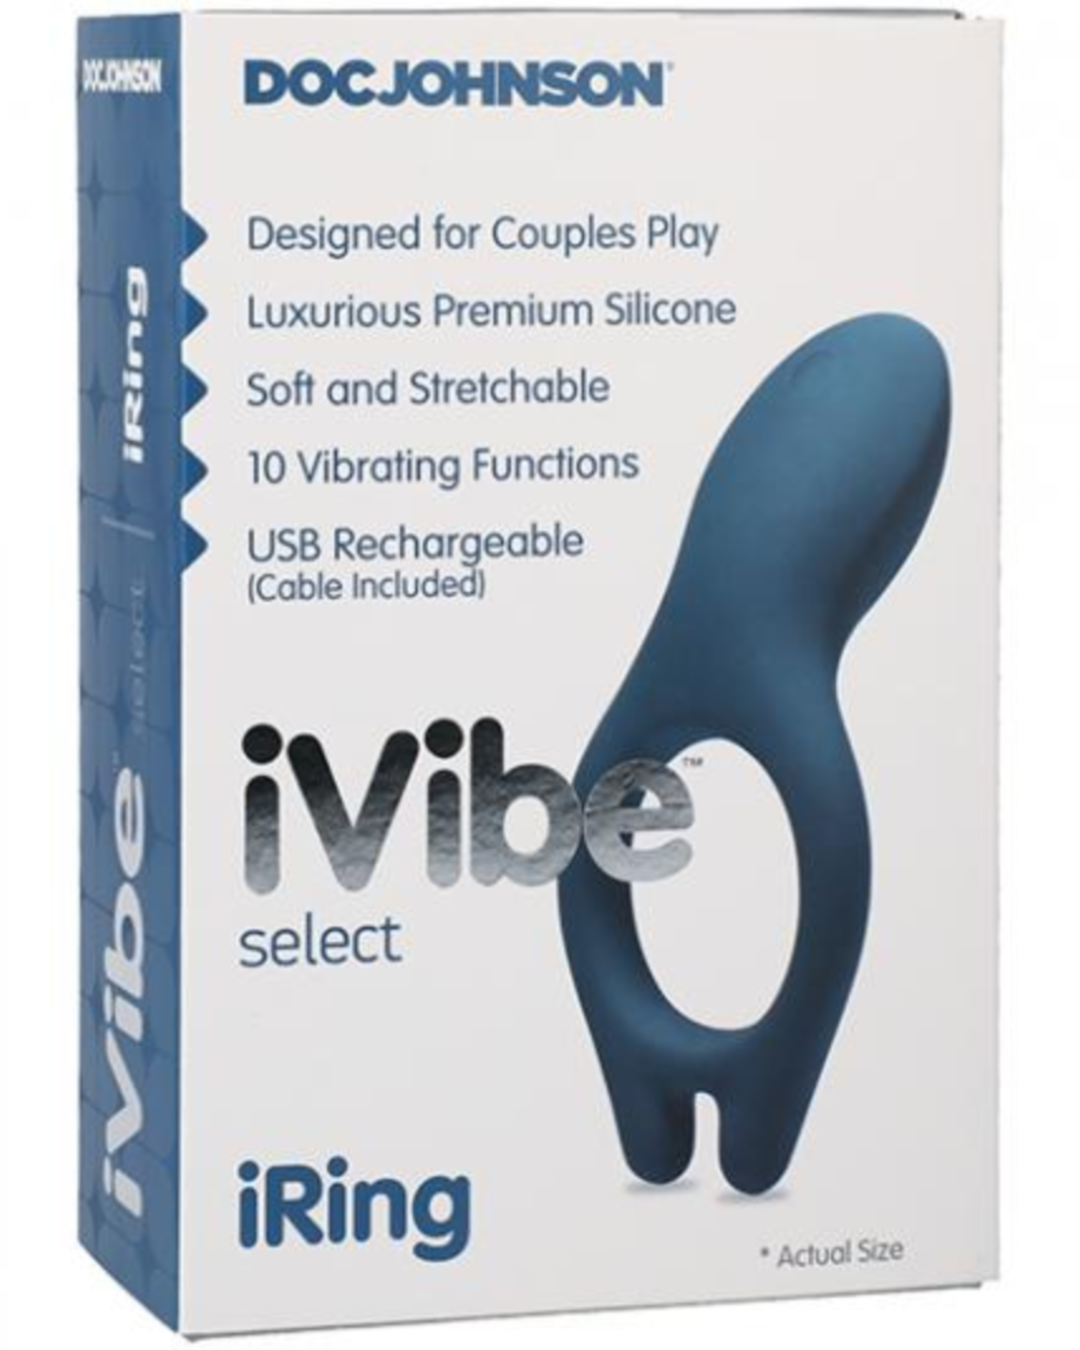 Ivibe Select Iring Vibrating Cock Ring by Doc Johnson - Blue box